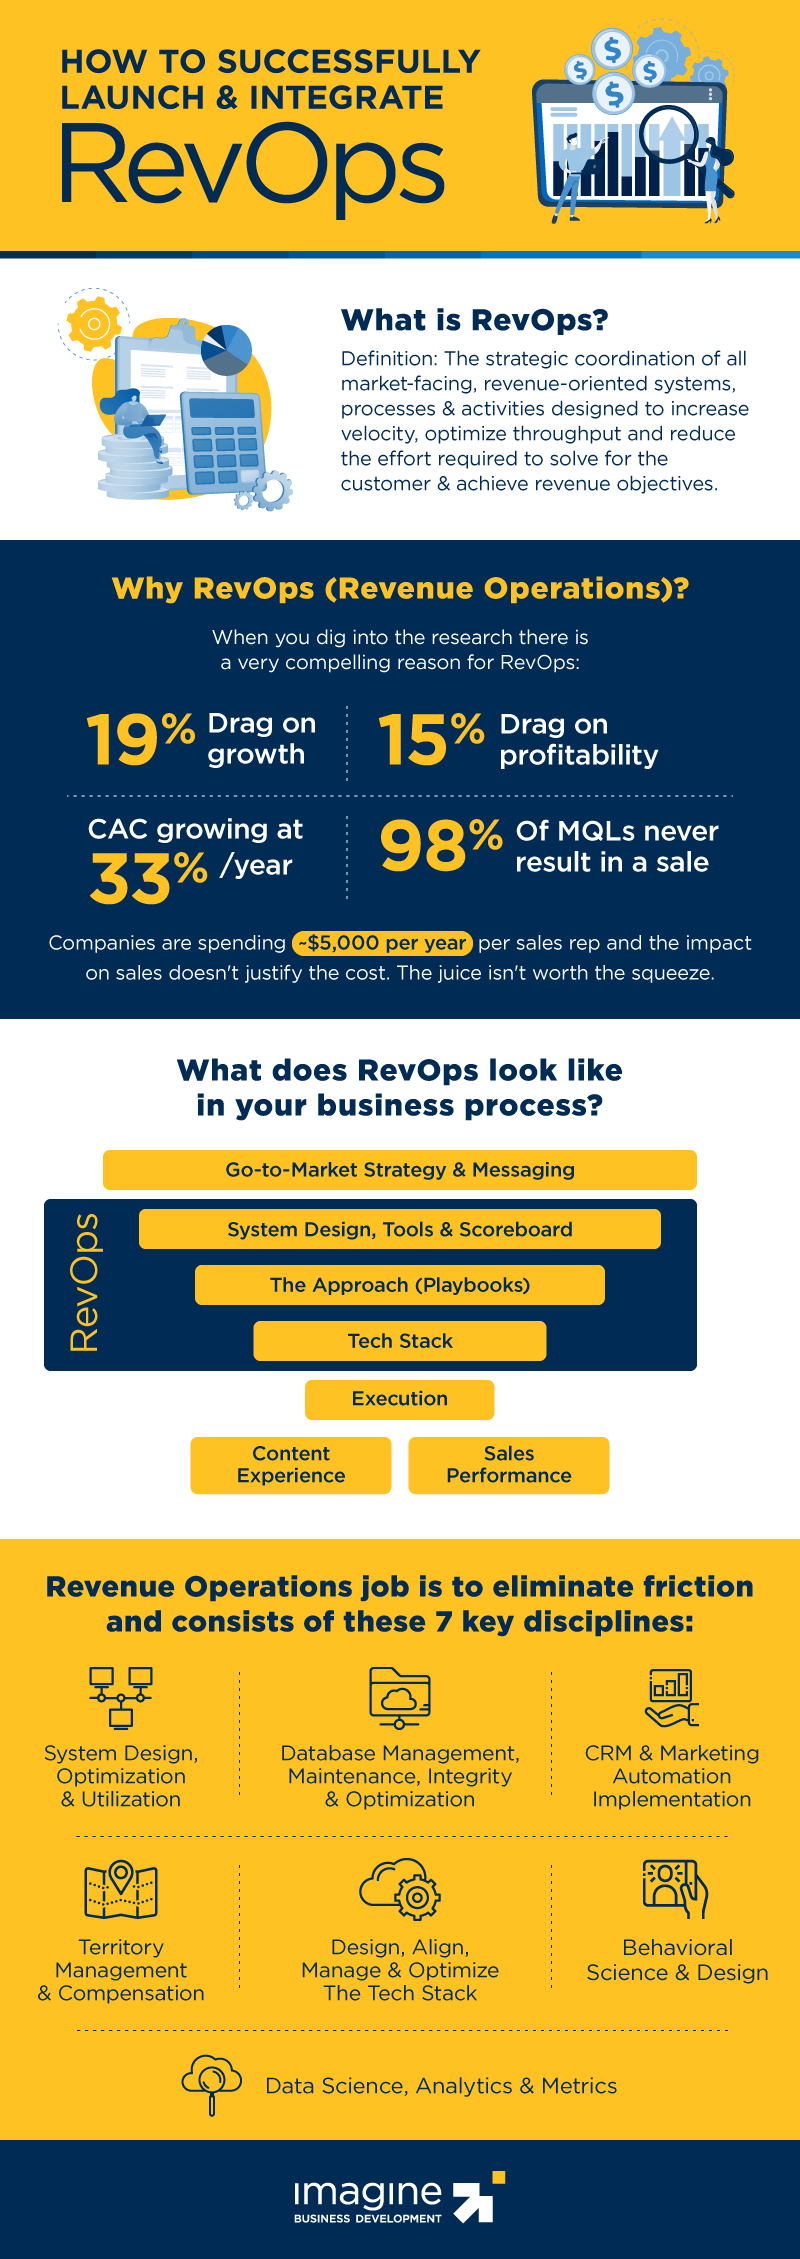 Revenue-Operations-RevOps-Integrate-Successfully-Infographic